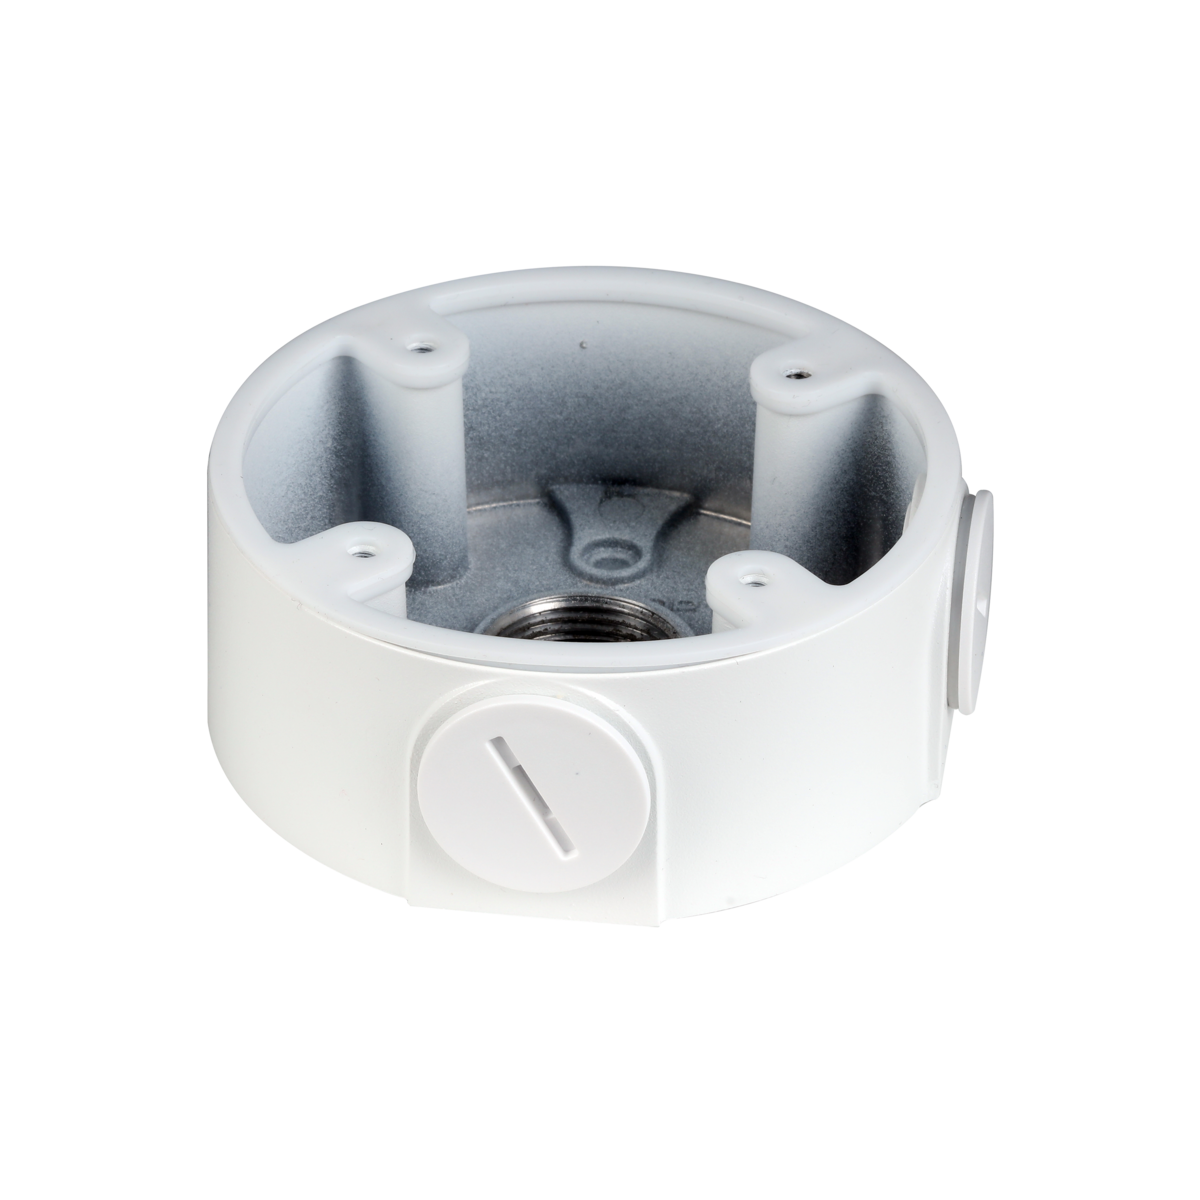 DAHUA JUNCTION BOX WITHOUT LID SUITS EYEBALL/ TURRET WHITE ALUMINIUM 3 KG MAX LOAD 0.17 KG